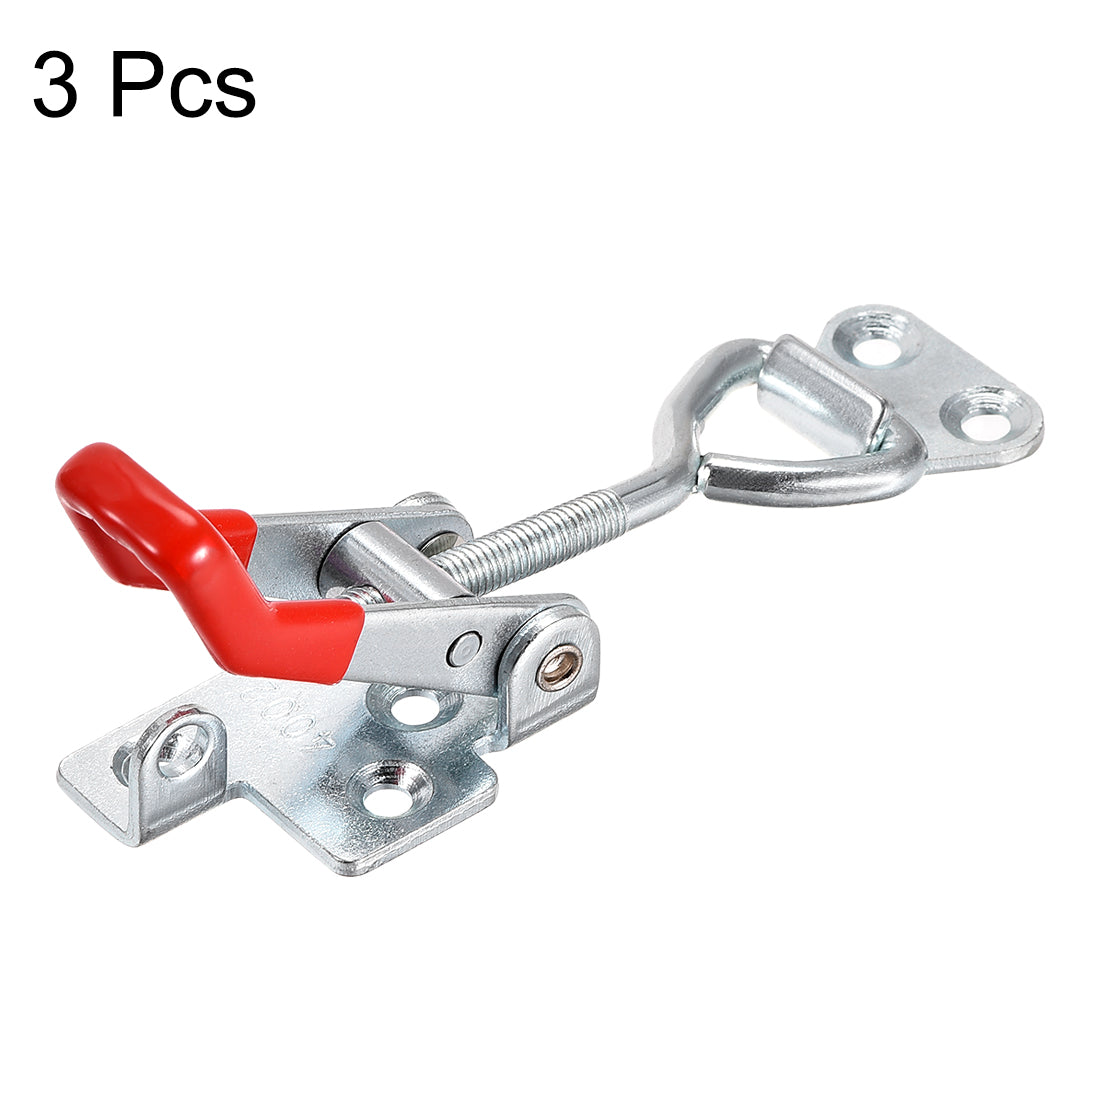 uxcell Uxcell 396lbs Holding Capacity Iron Pull-Action Latch Adjustable Toggle Clamp, 3 Pcs